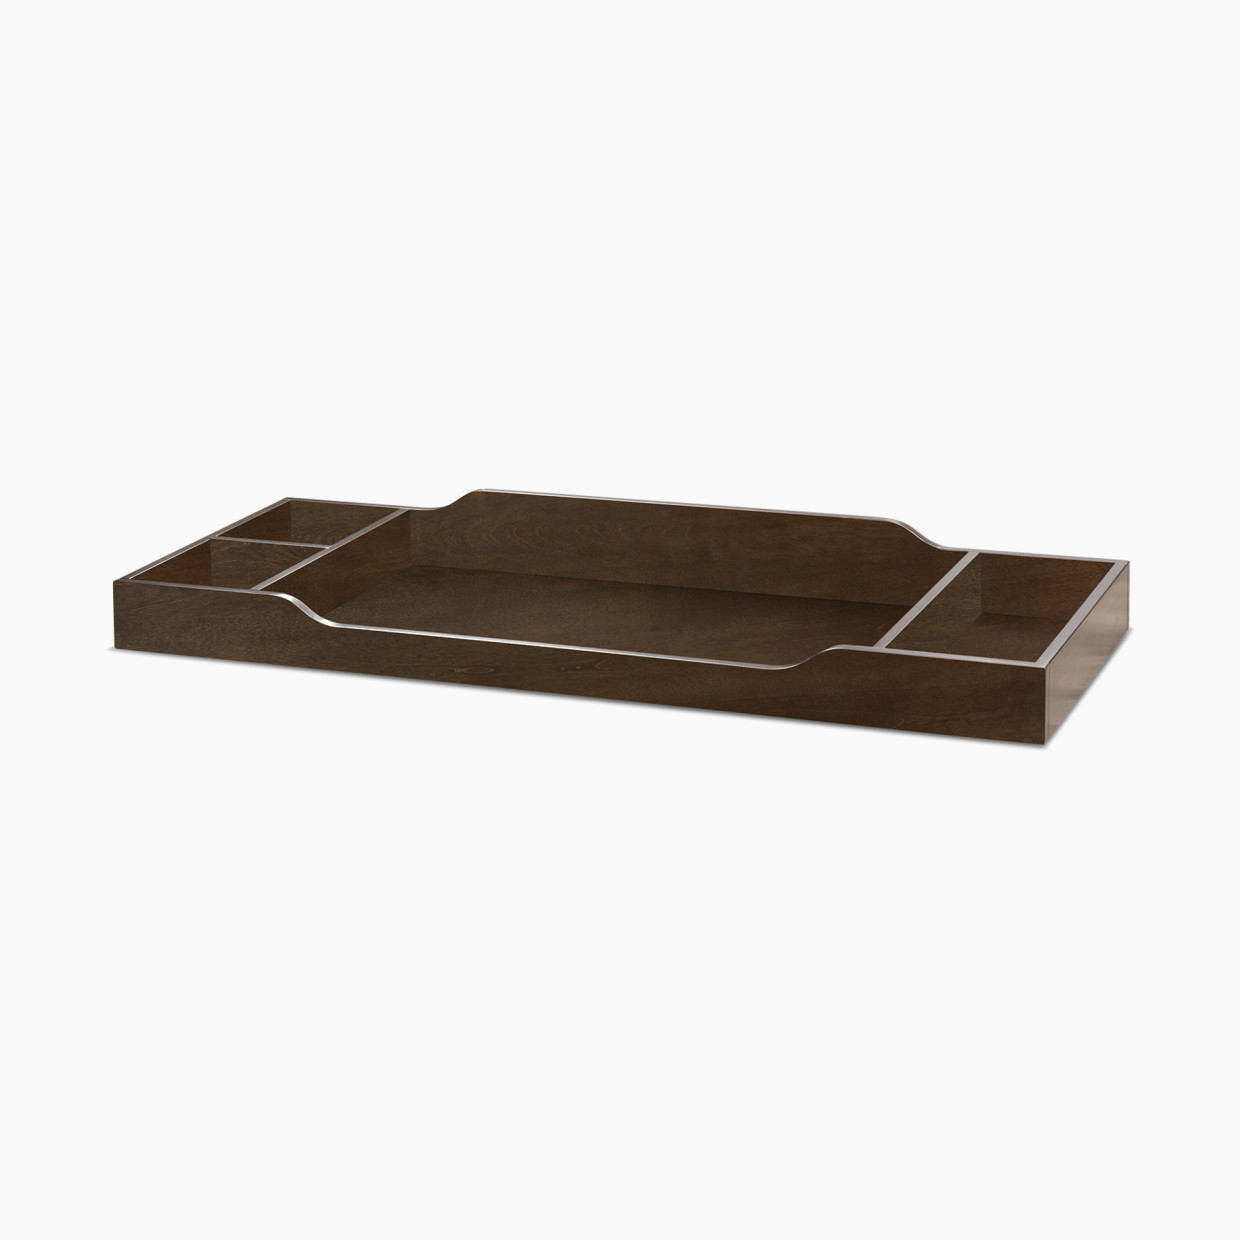 Sorelle Topper for Double Dresser - Chocolate, 50 X 19 X 6.